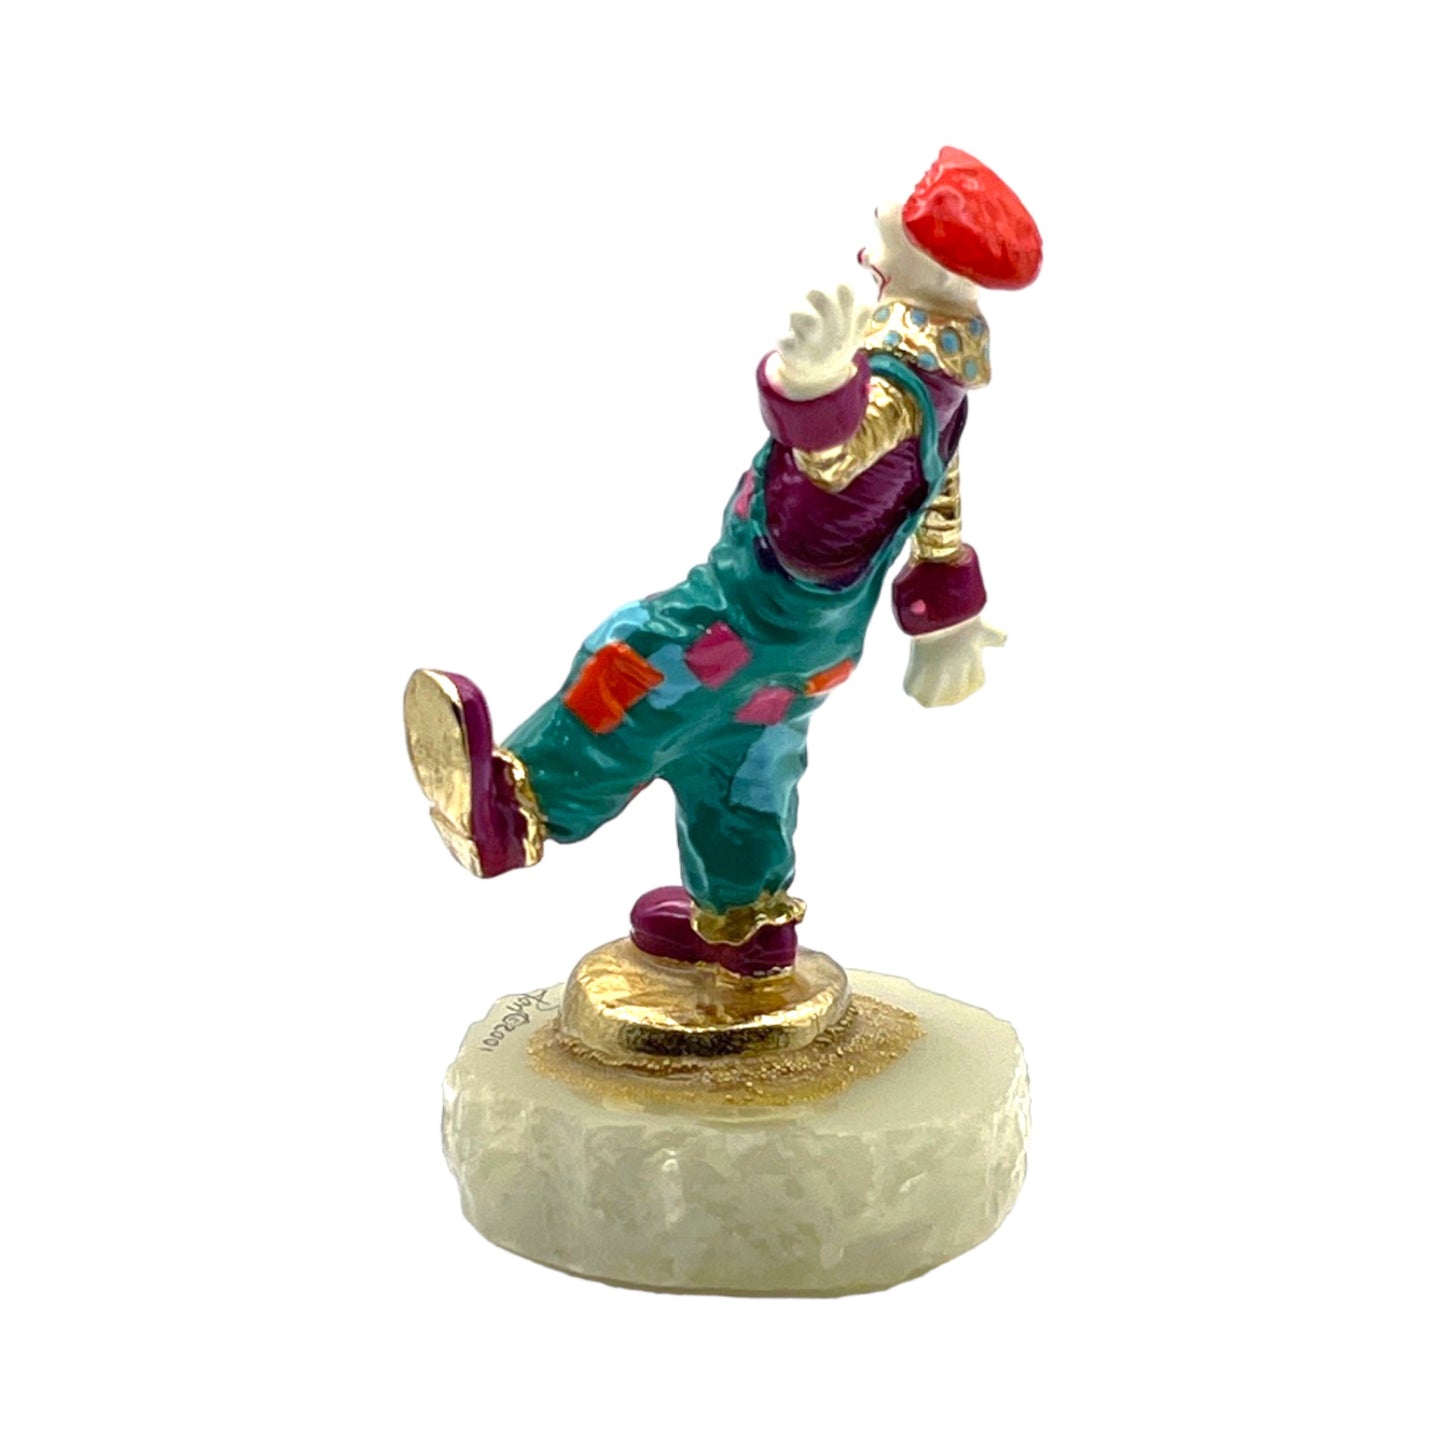 Ron Lee - Overalls Patchwork Clown Figurine  - Limited Edition - 20014 - Signed - 5"